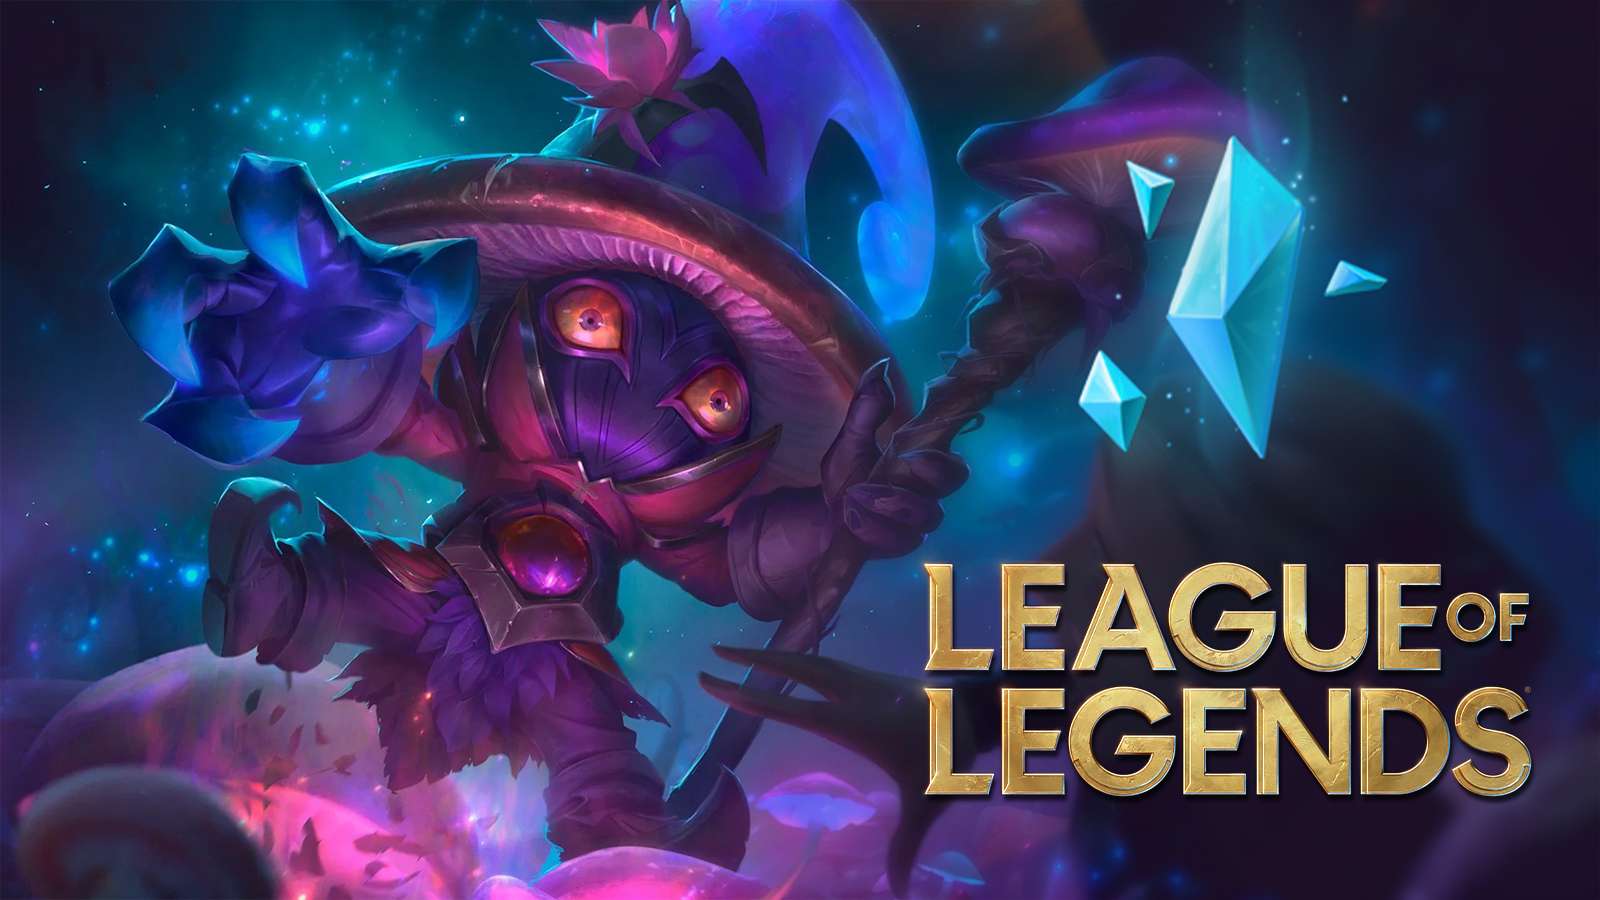 League of Legends character next to the game's logo